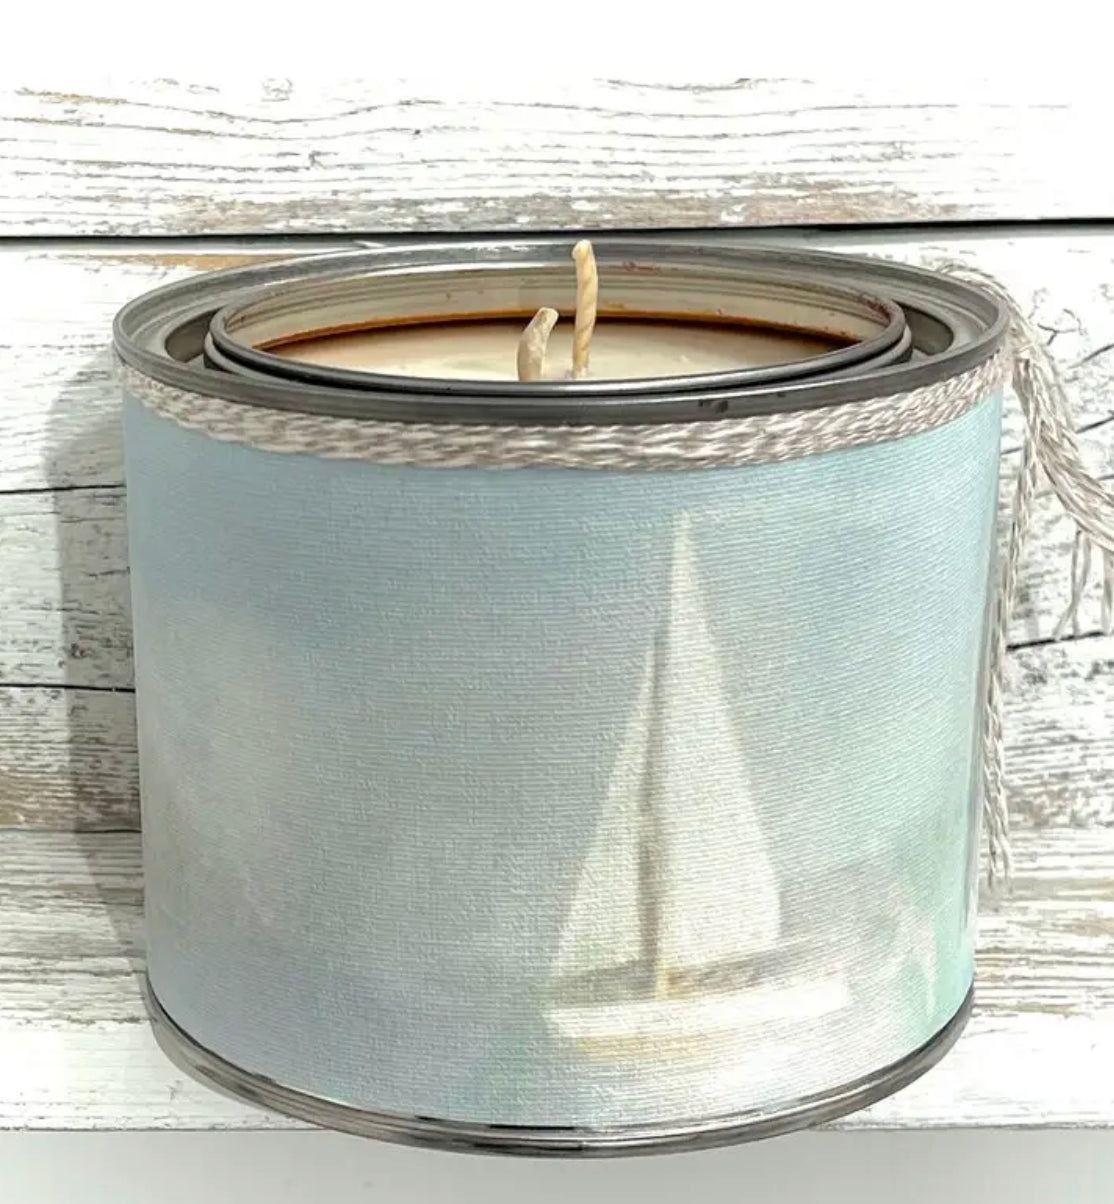 Off The Dock - Soy Candle - Gardenia or Ocean Scent